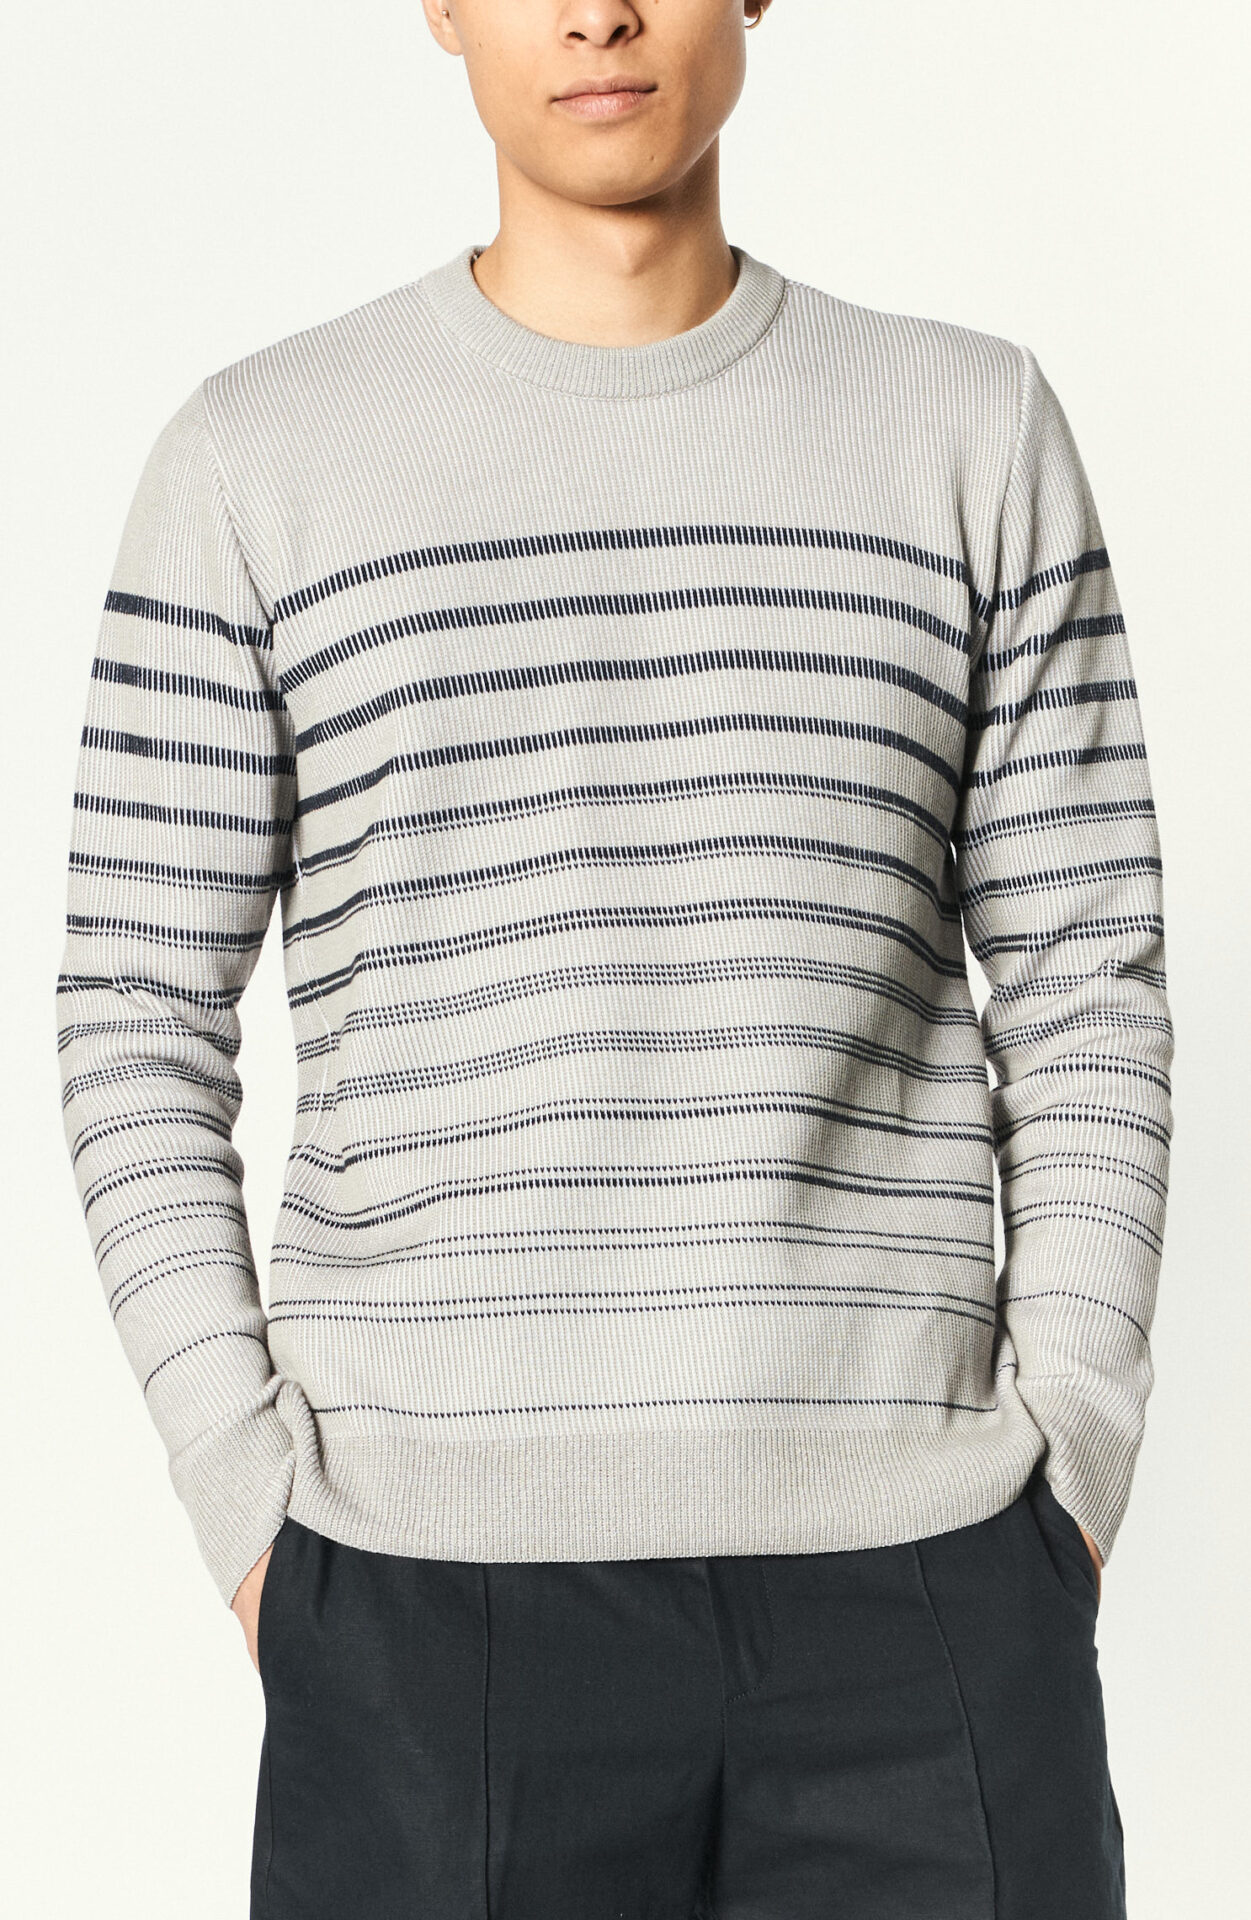 Sand color sweater "Tanager" with black stripes